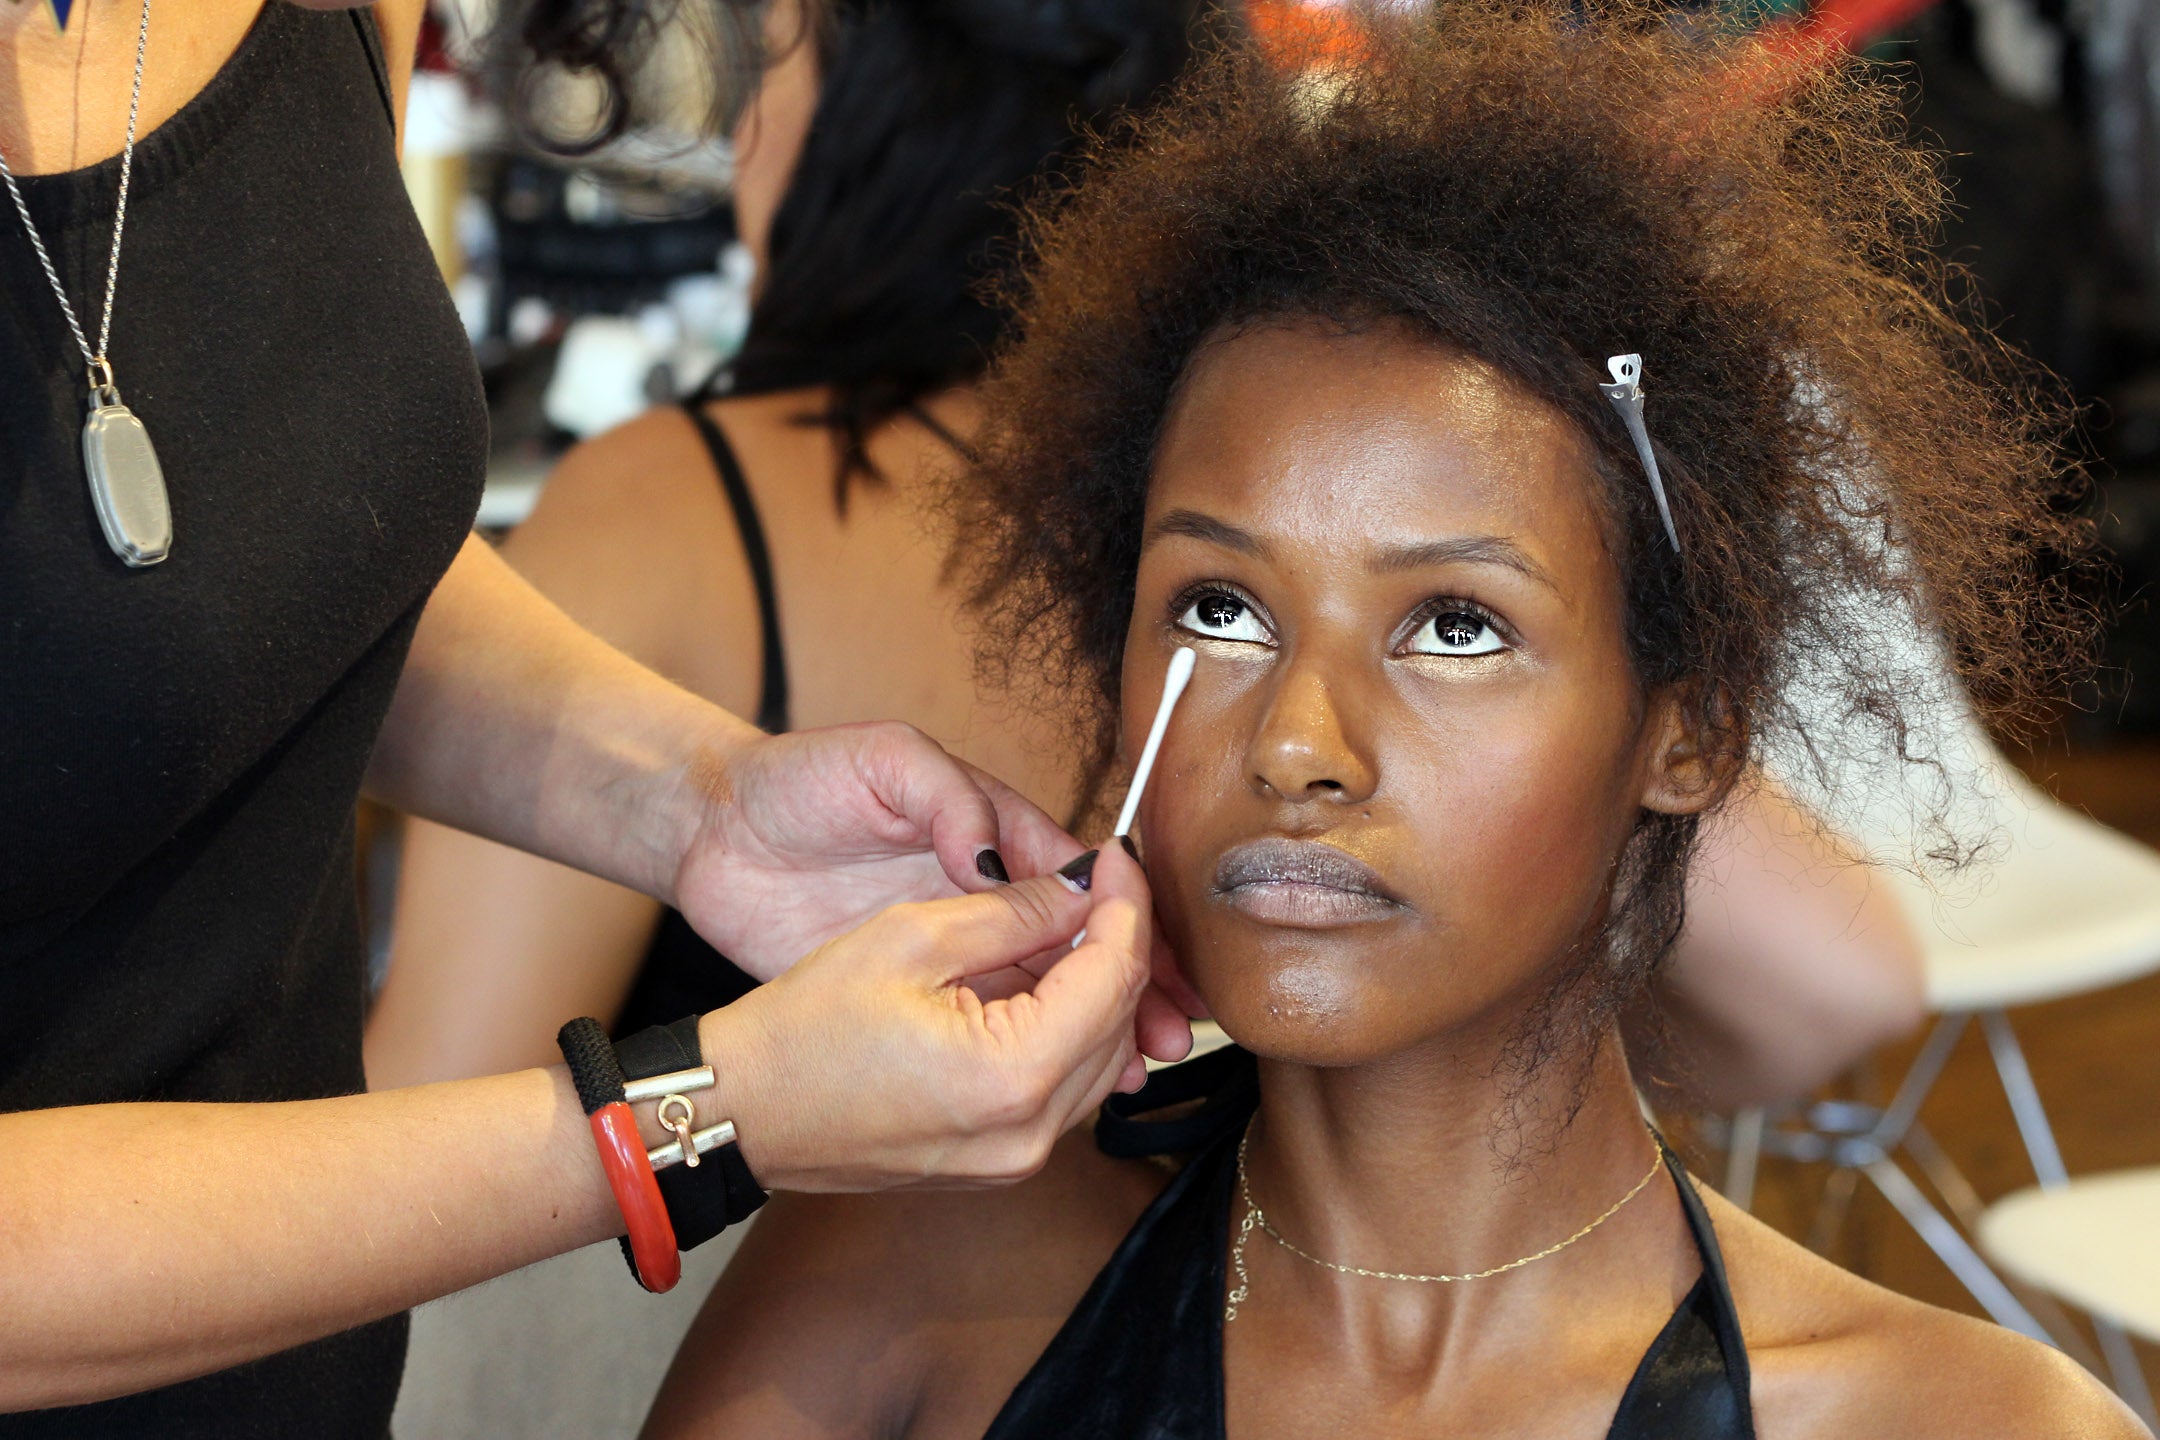 Get The Look from Tracy Reese's Catwalk